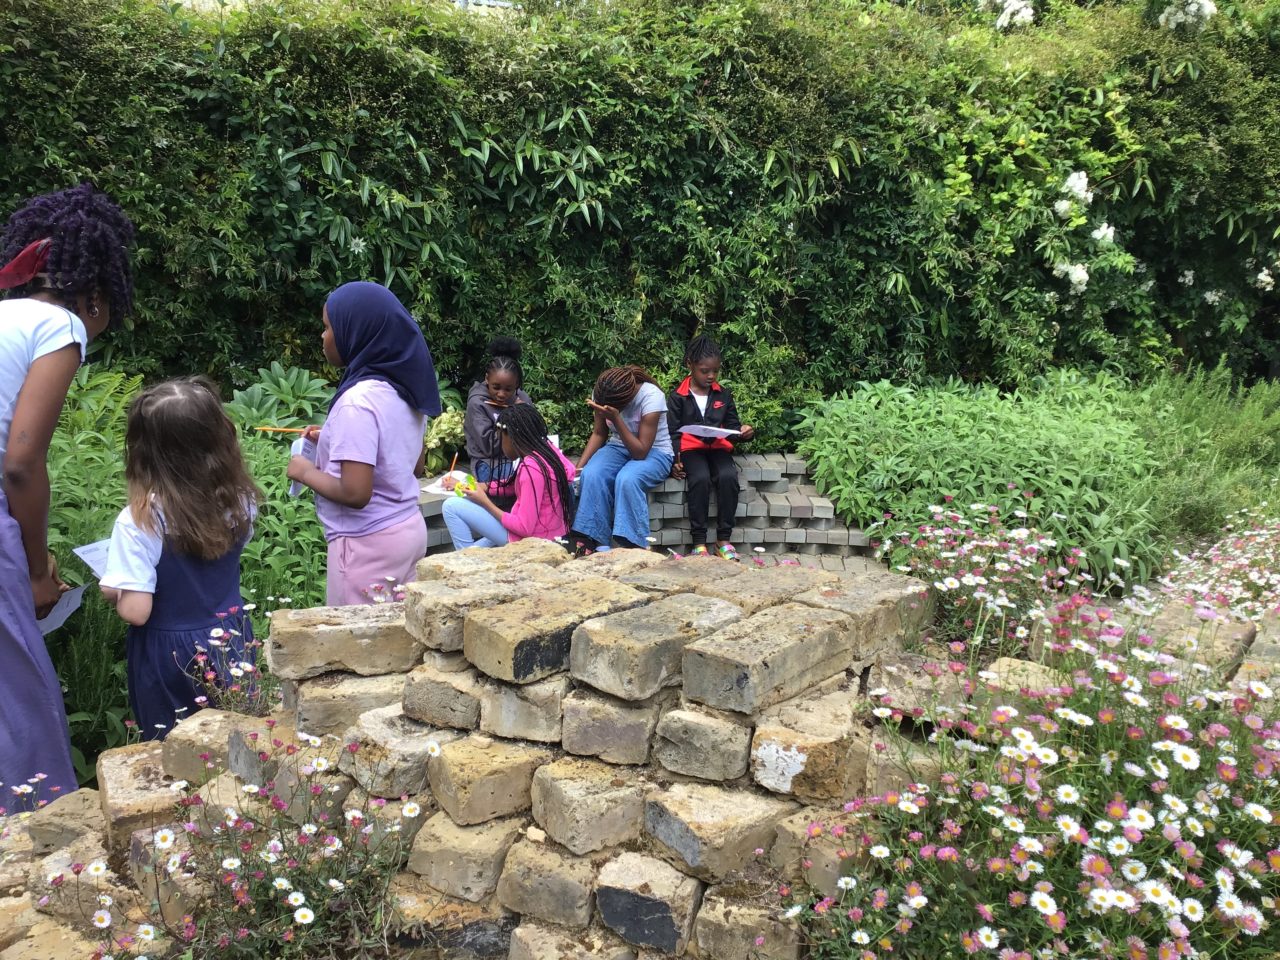 A group of children holding paper worksheets in a garden with a brick feature.